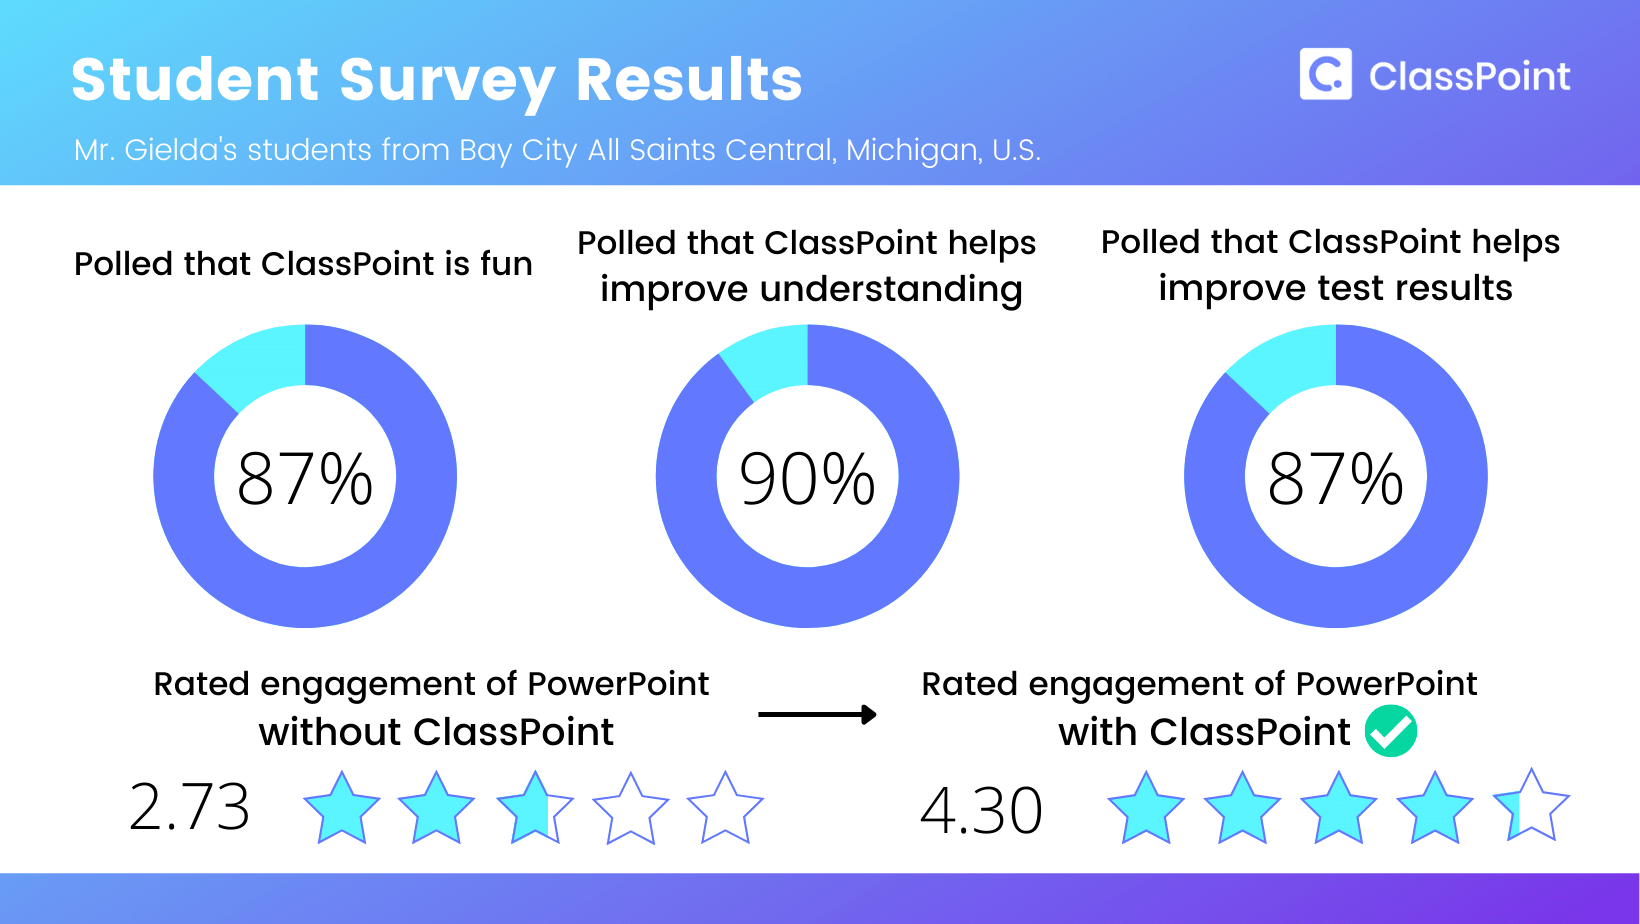 Student survey results from case study, Michigan, U.S.